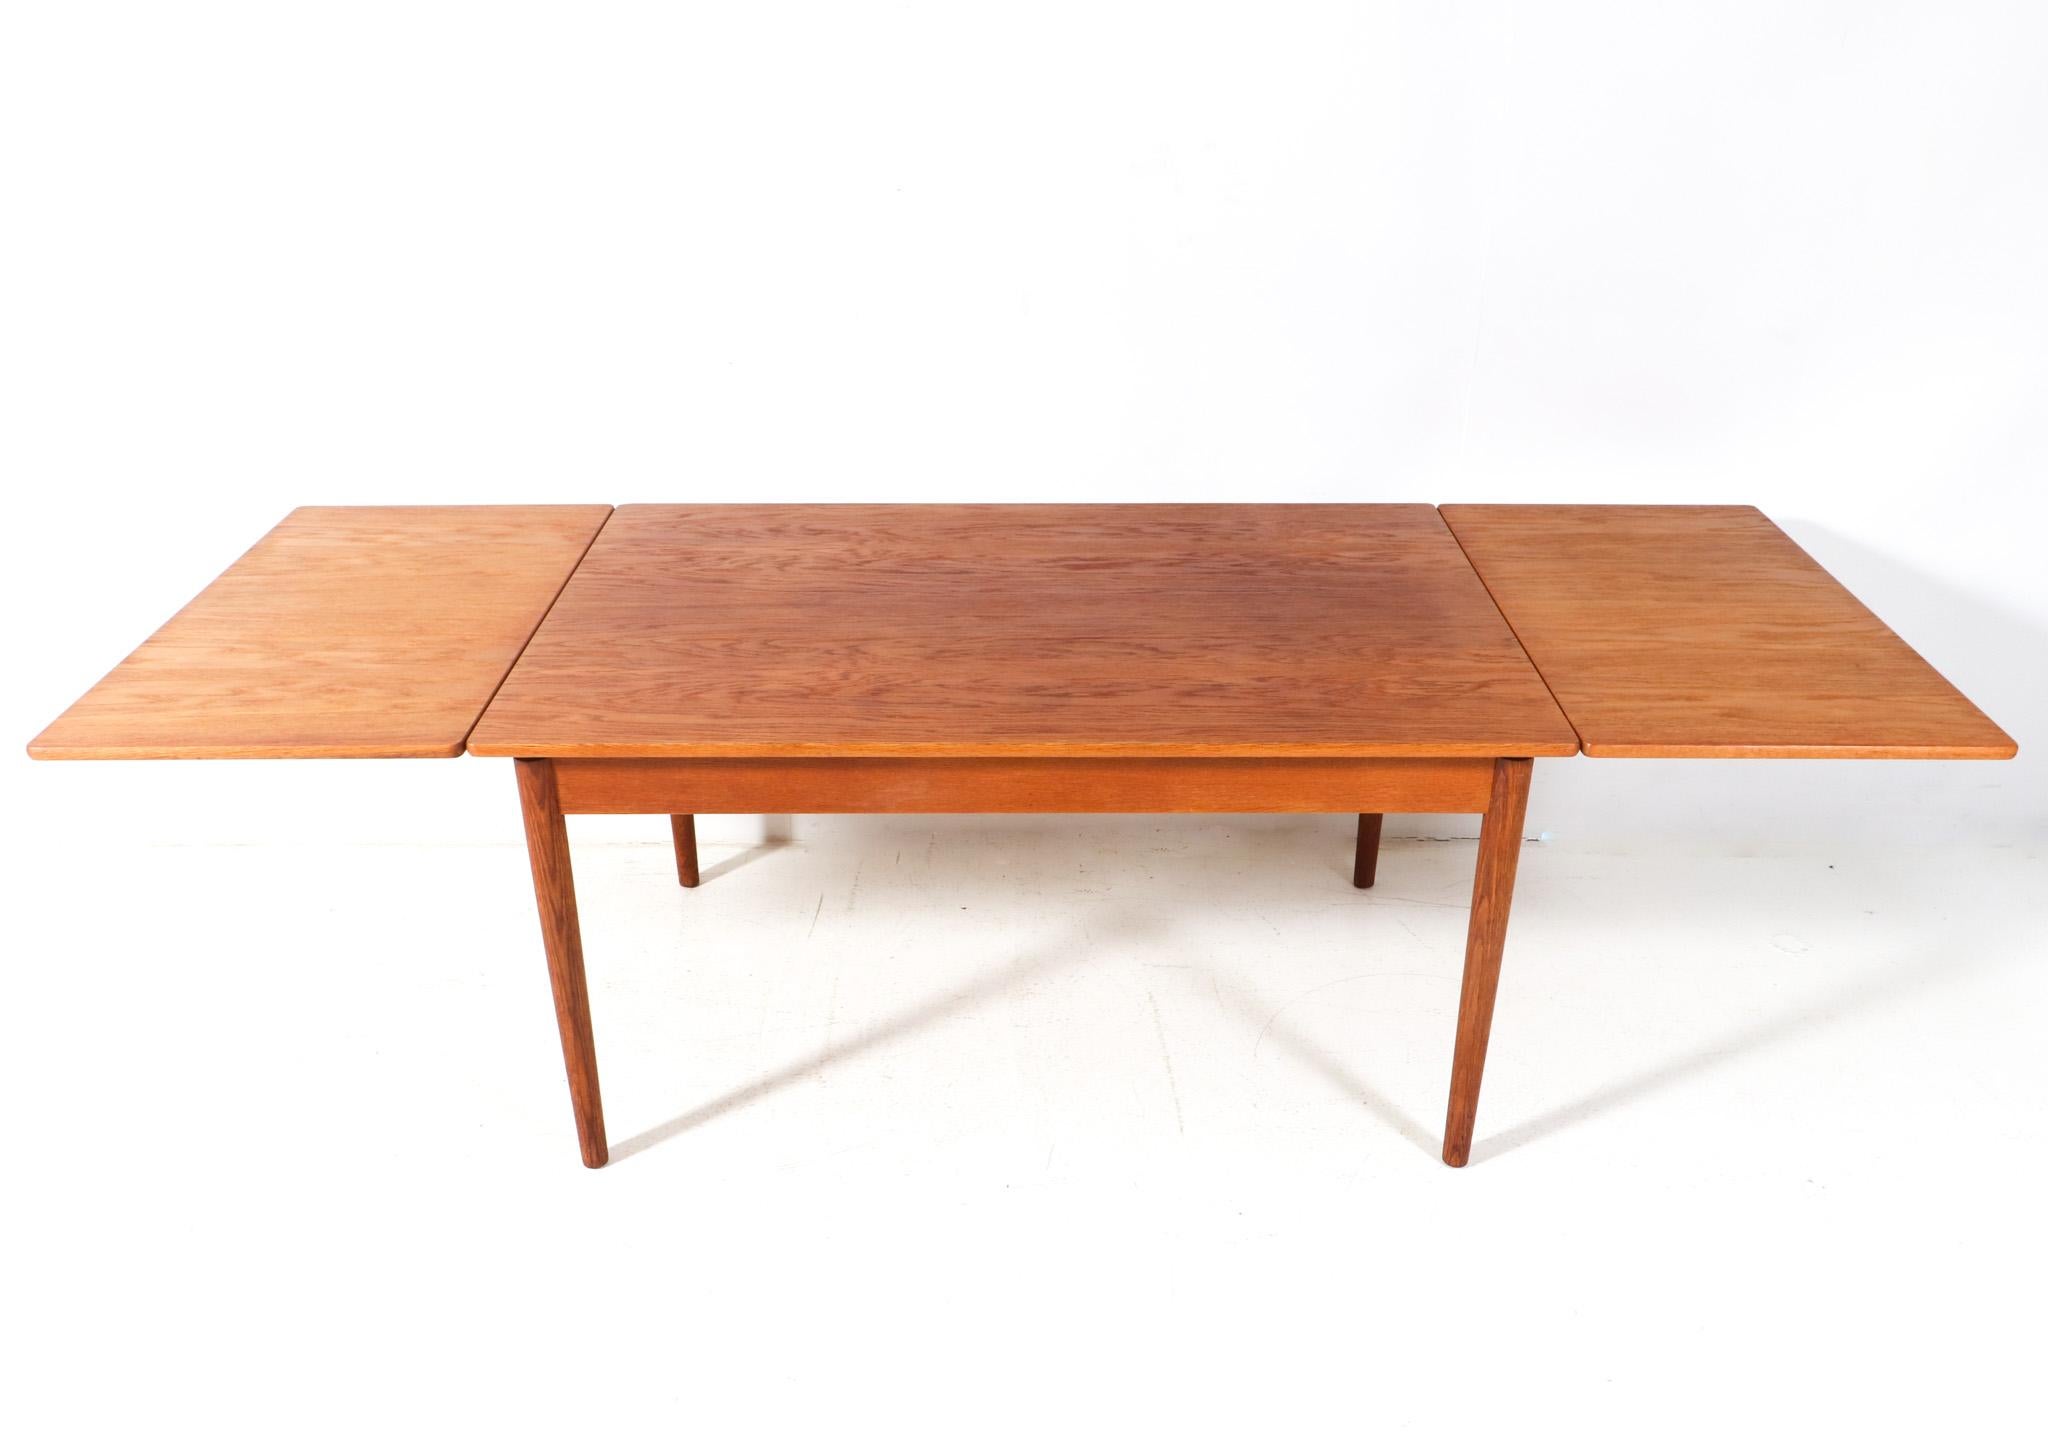  Mid-Century Modern Teak Extendable Dining Room Table Mo. 215 by Farstrup, 1960s For Sale 2